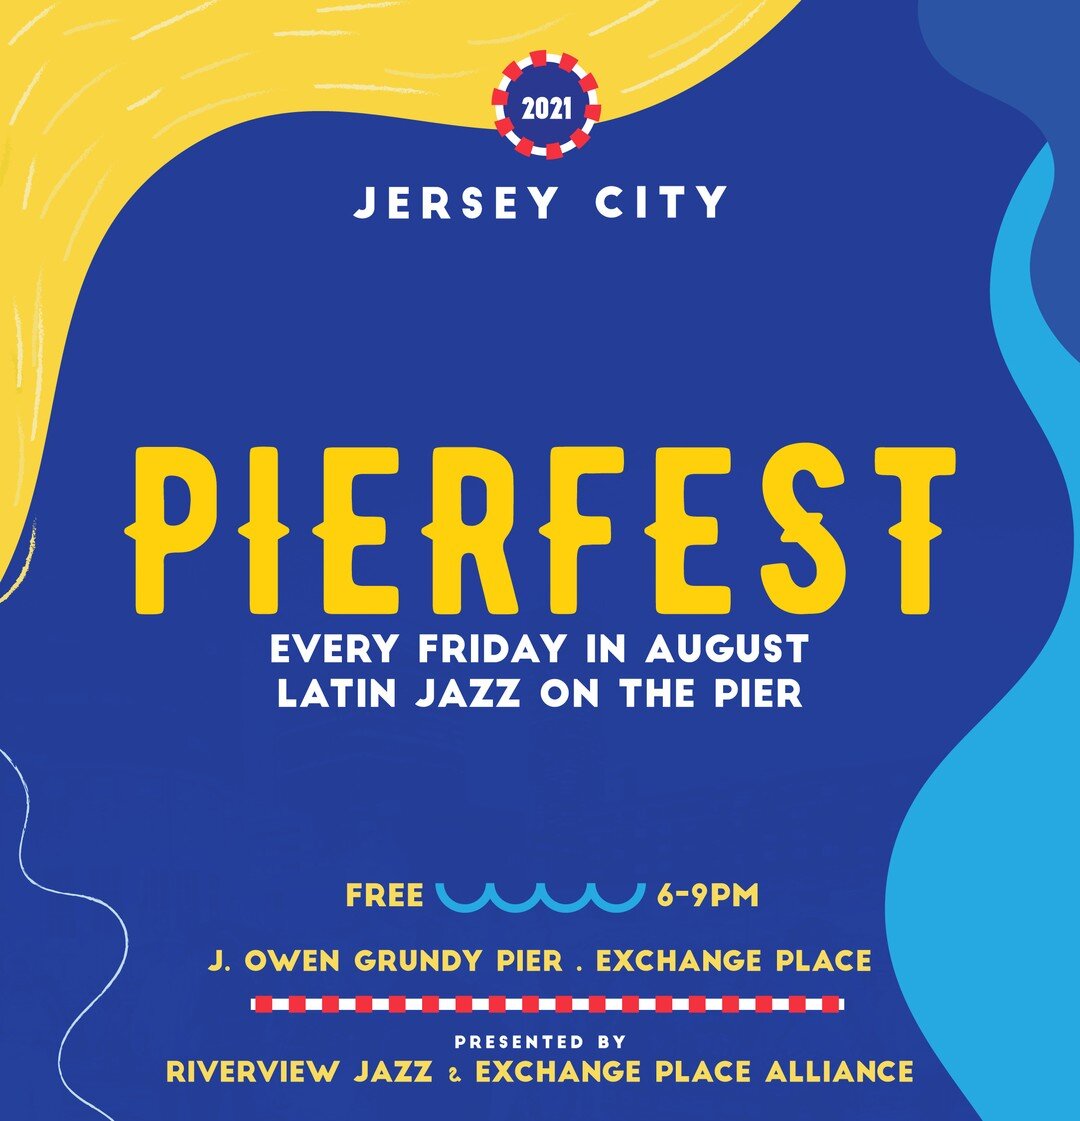 PIERFEST is back!

Come and Join us to celebrate summer, music and culture of Jersey City with our new PIERFEST 2021 featuring two stages of world-class Latin Jazz, dance instruction, and food trucks. 

August 6 - 6-9pm - FREE
Abelita Mateus / Papo V